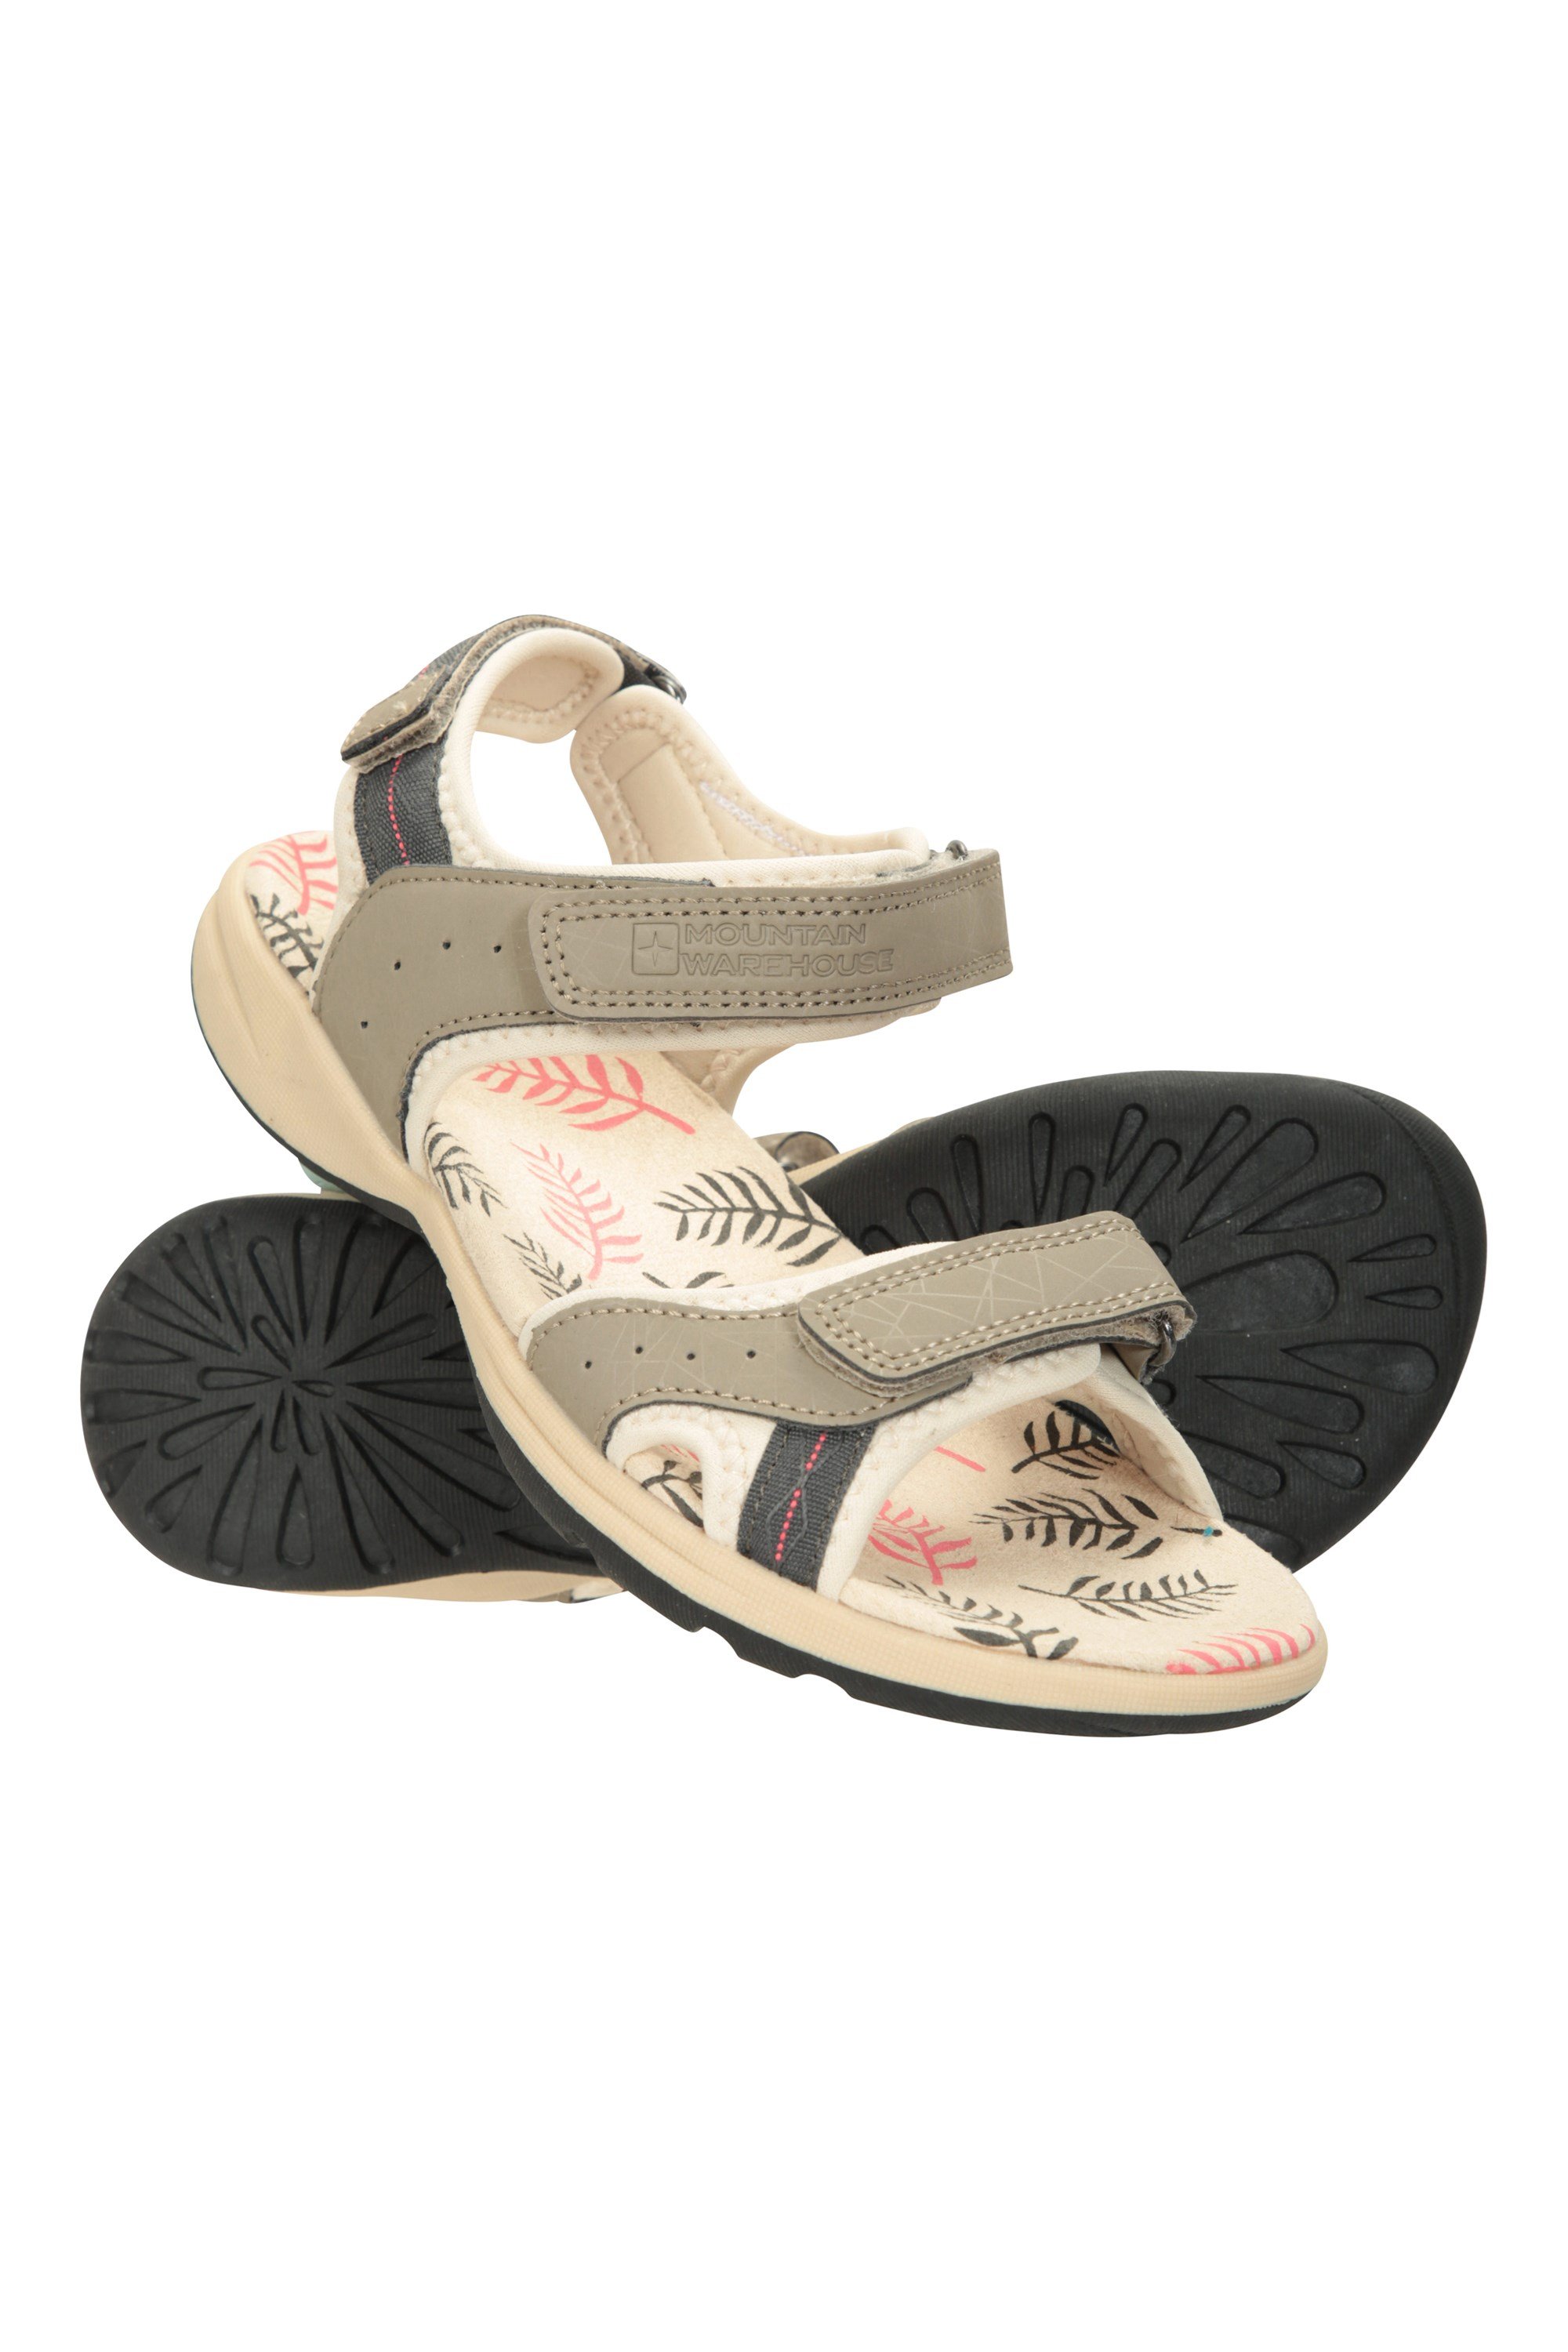 Athens Printed Womens Sandals - Beige